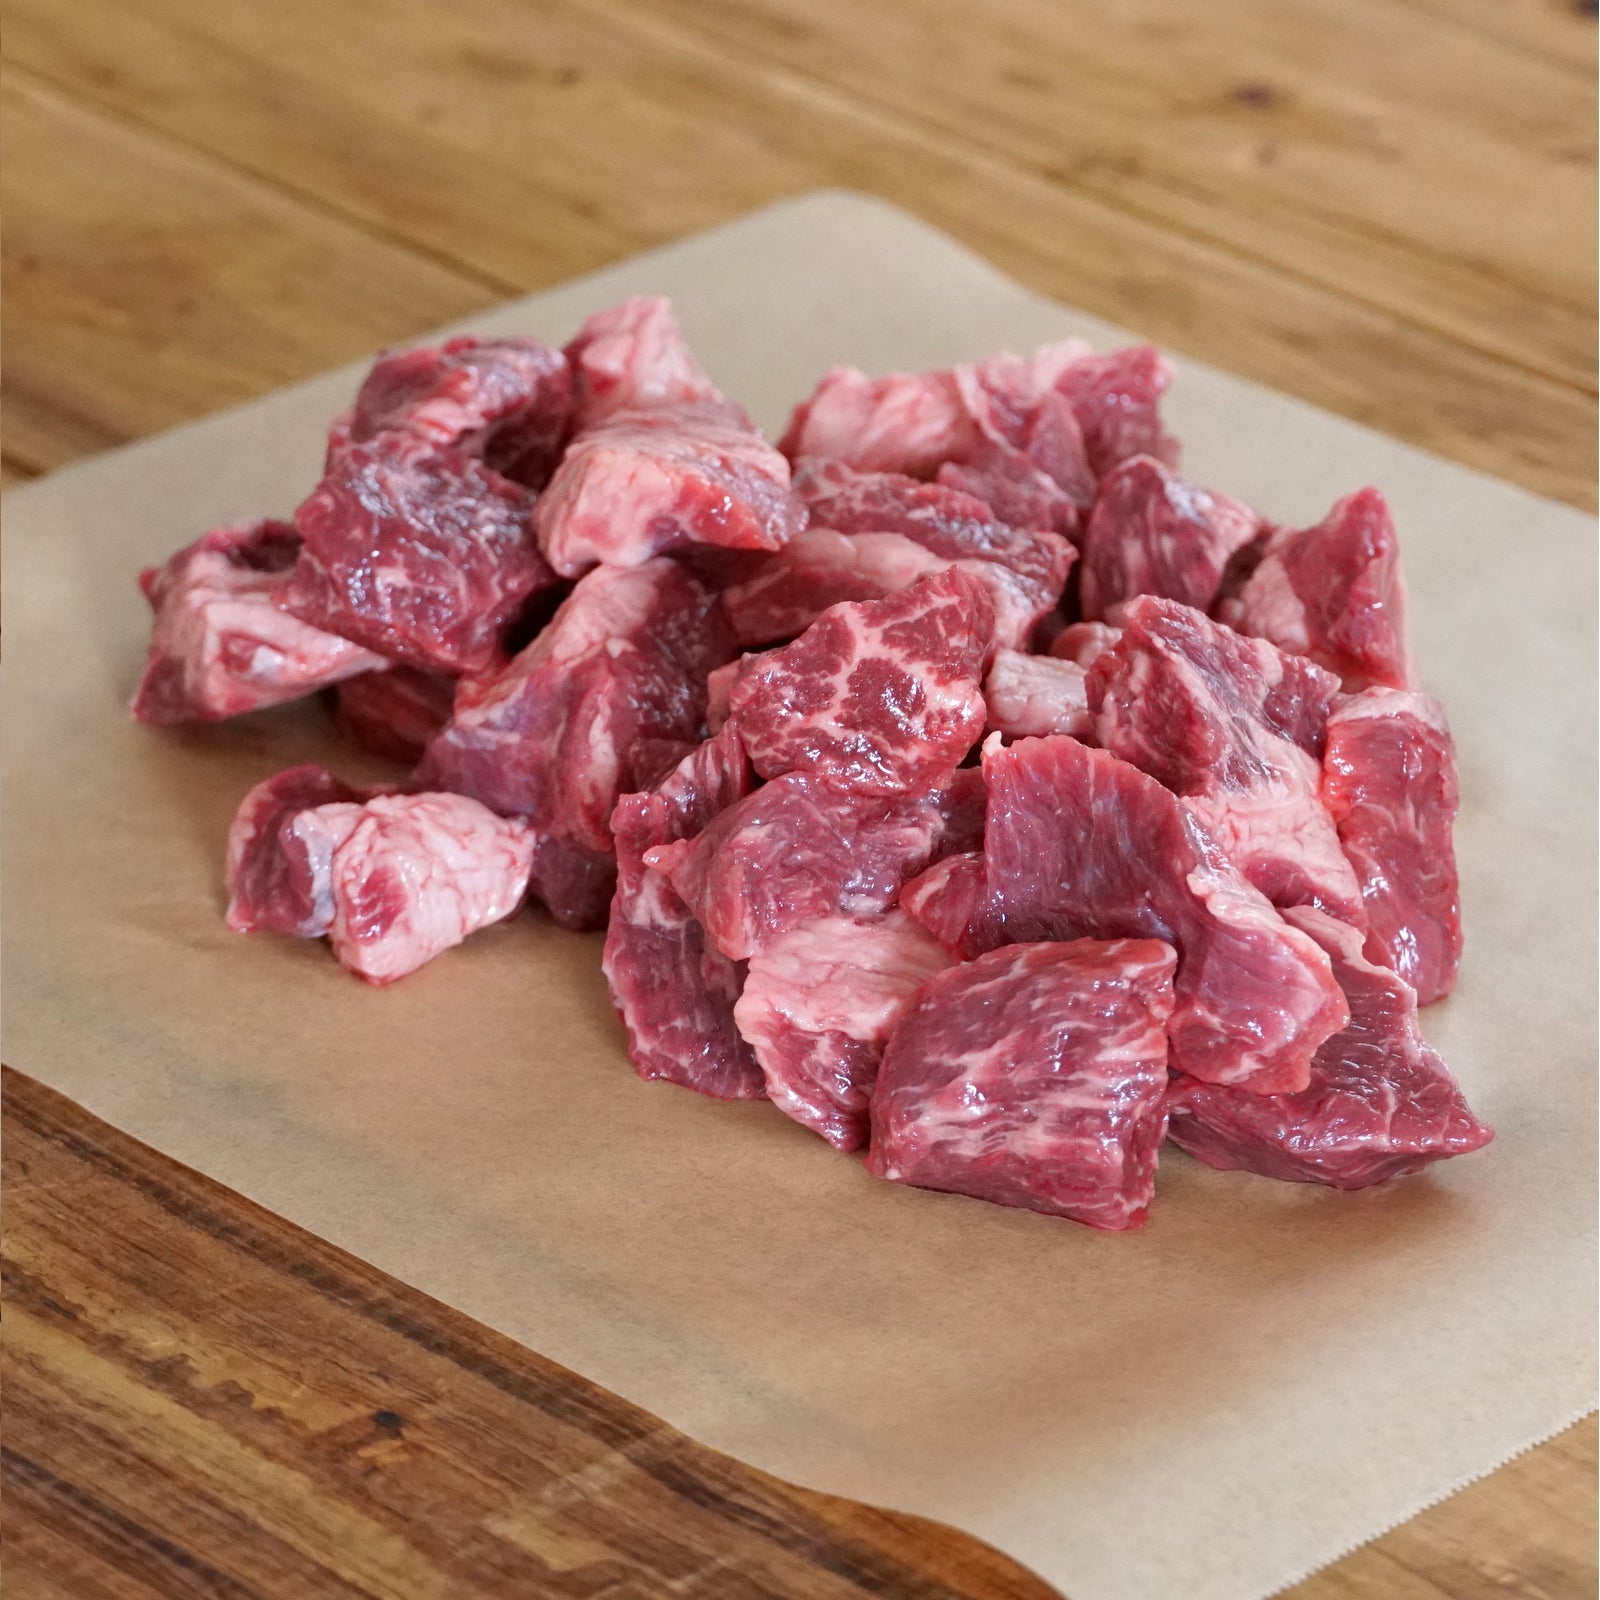 Curated Set of Daily Meat Essentials (9 Types, 27 Items, 9.9kg) - Horizon Farms